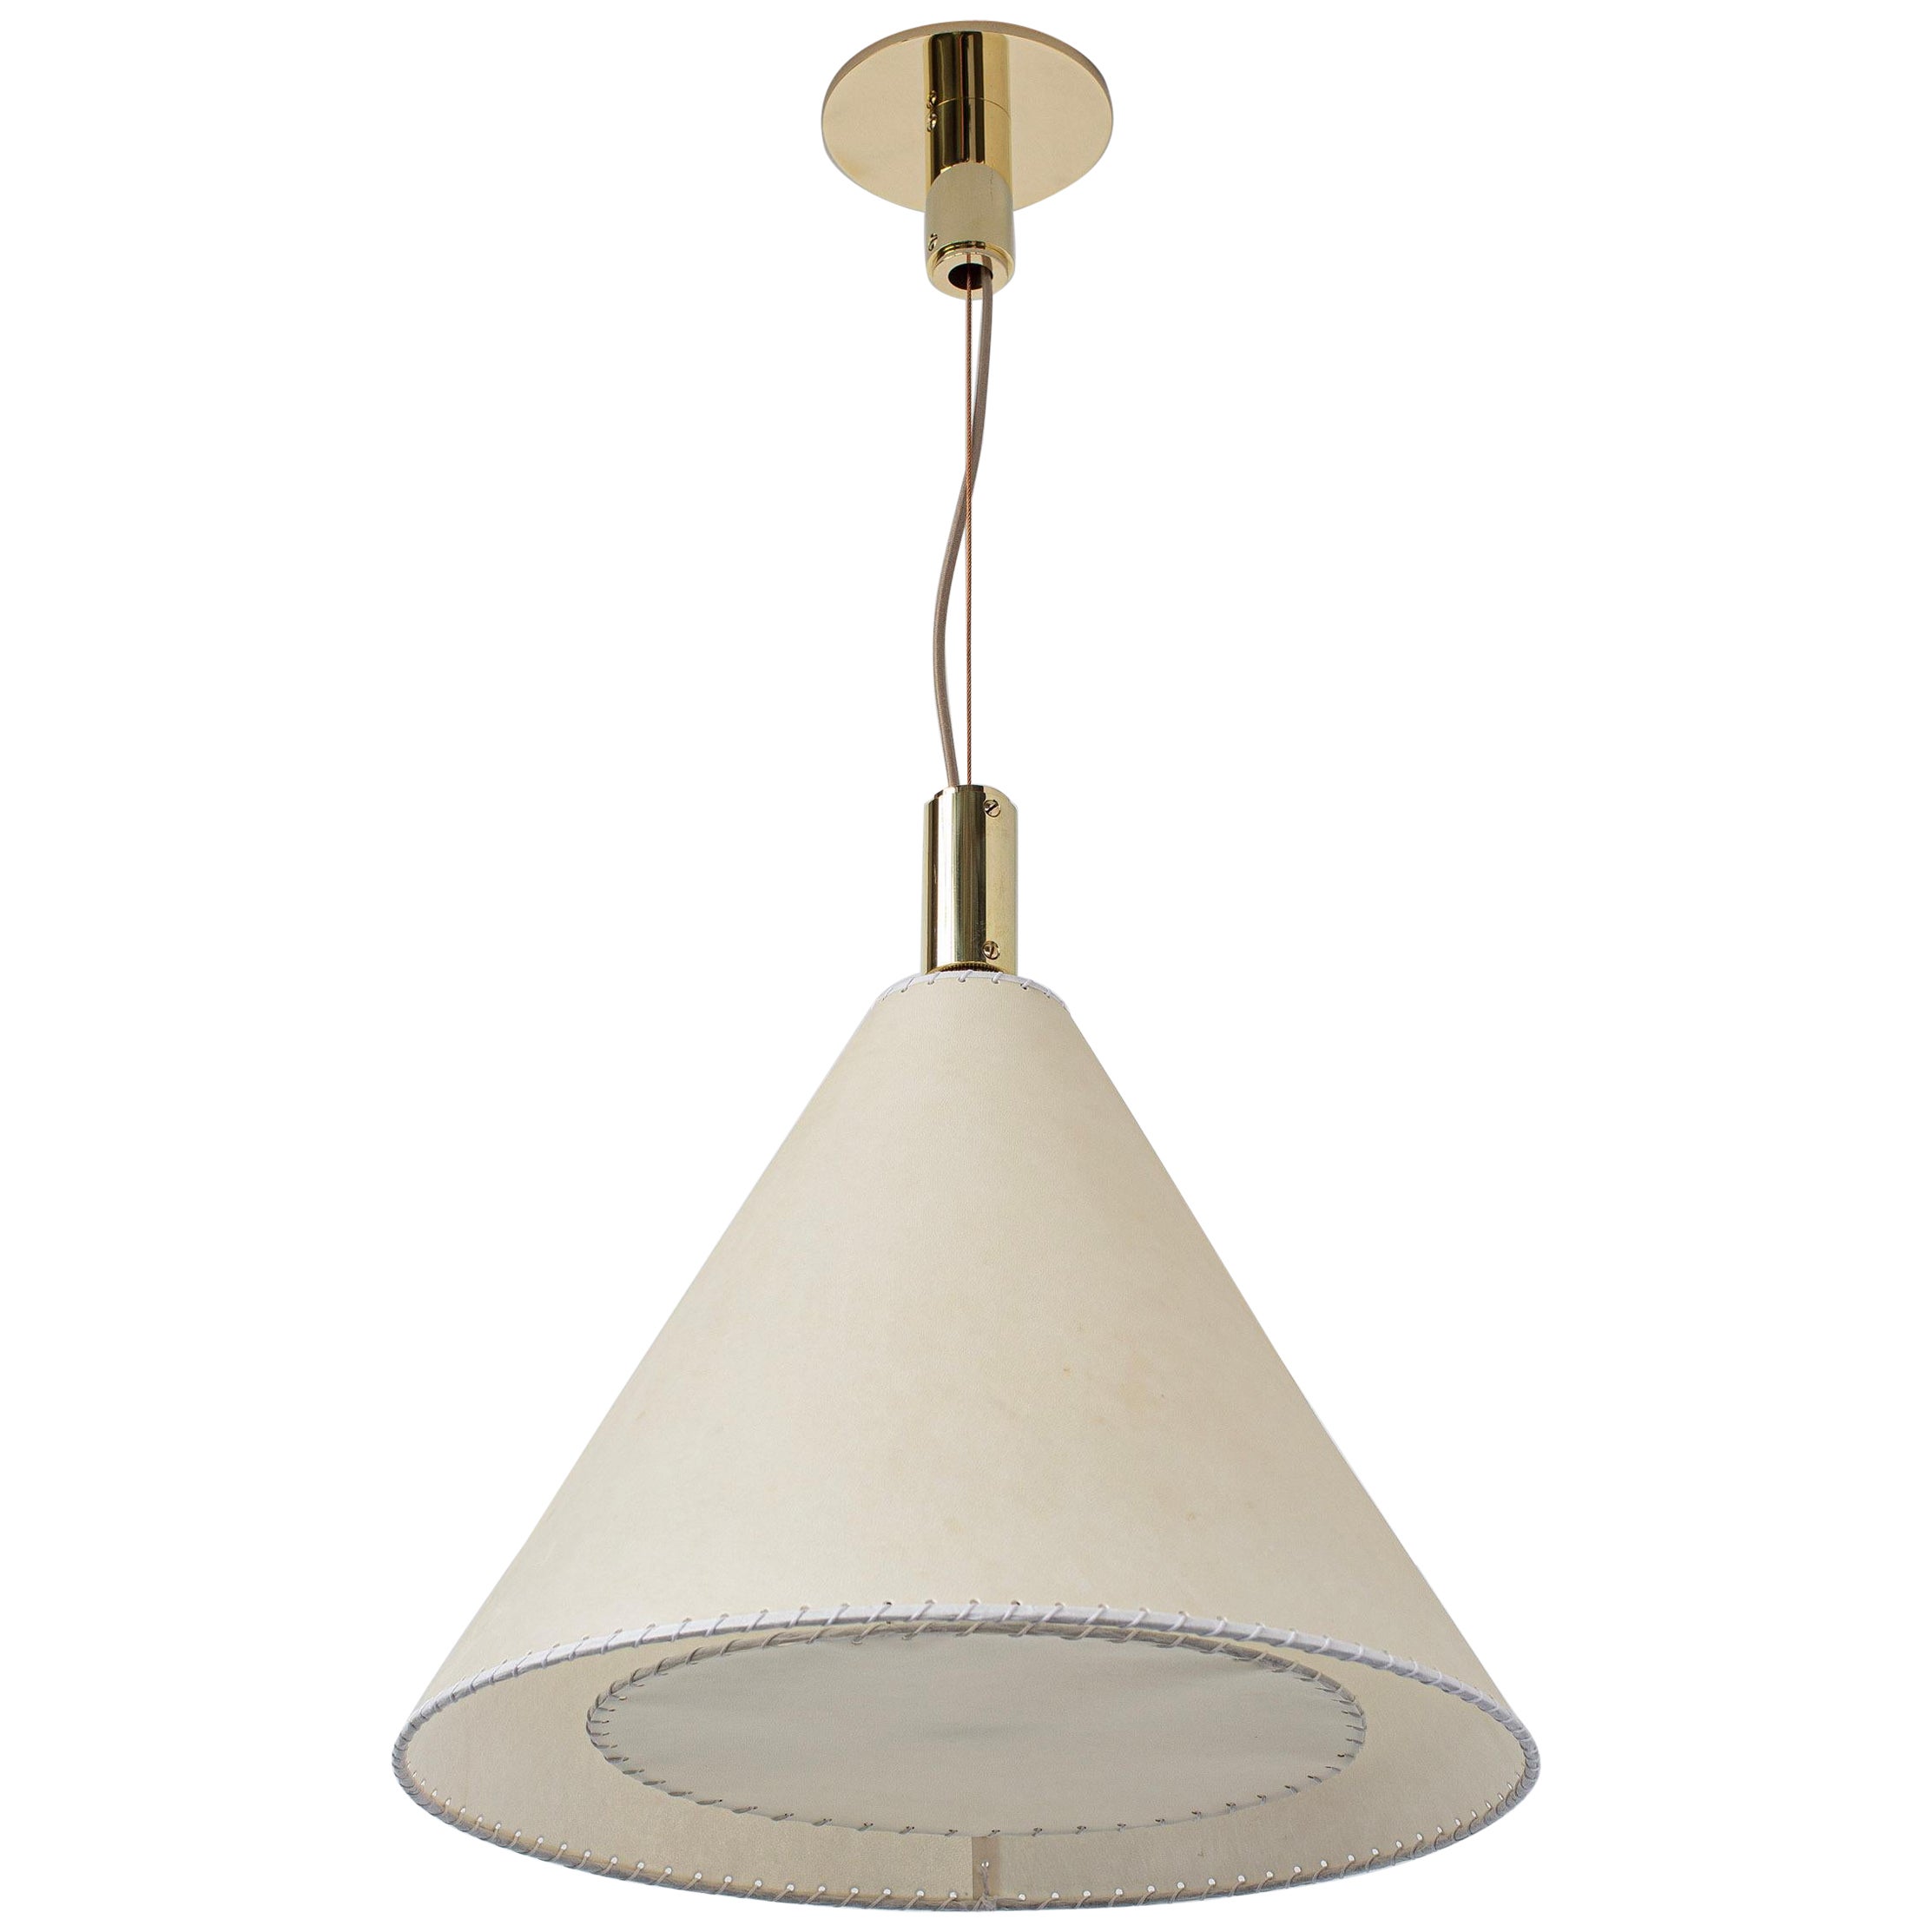 Series 02 Pendant, Polished Unlacquered Brass, Large Goatskin Parchment Shade For Sale